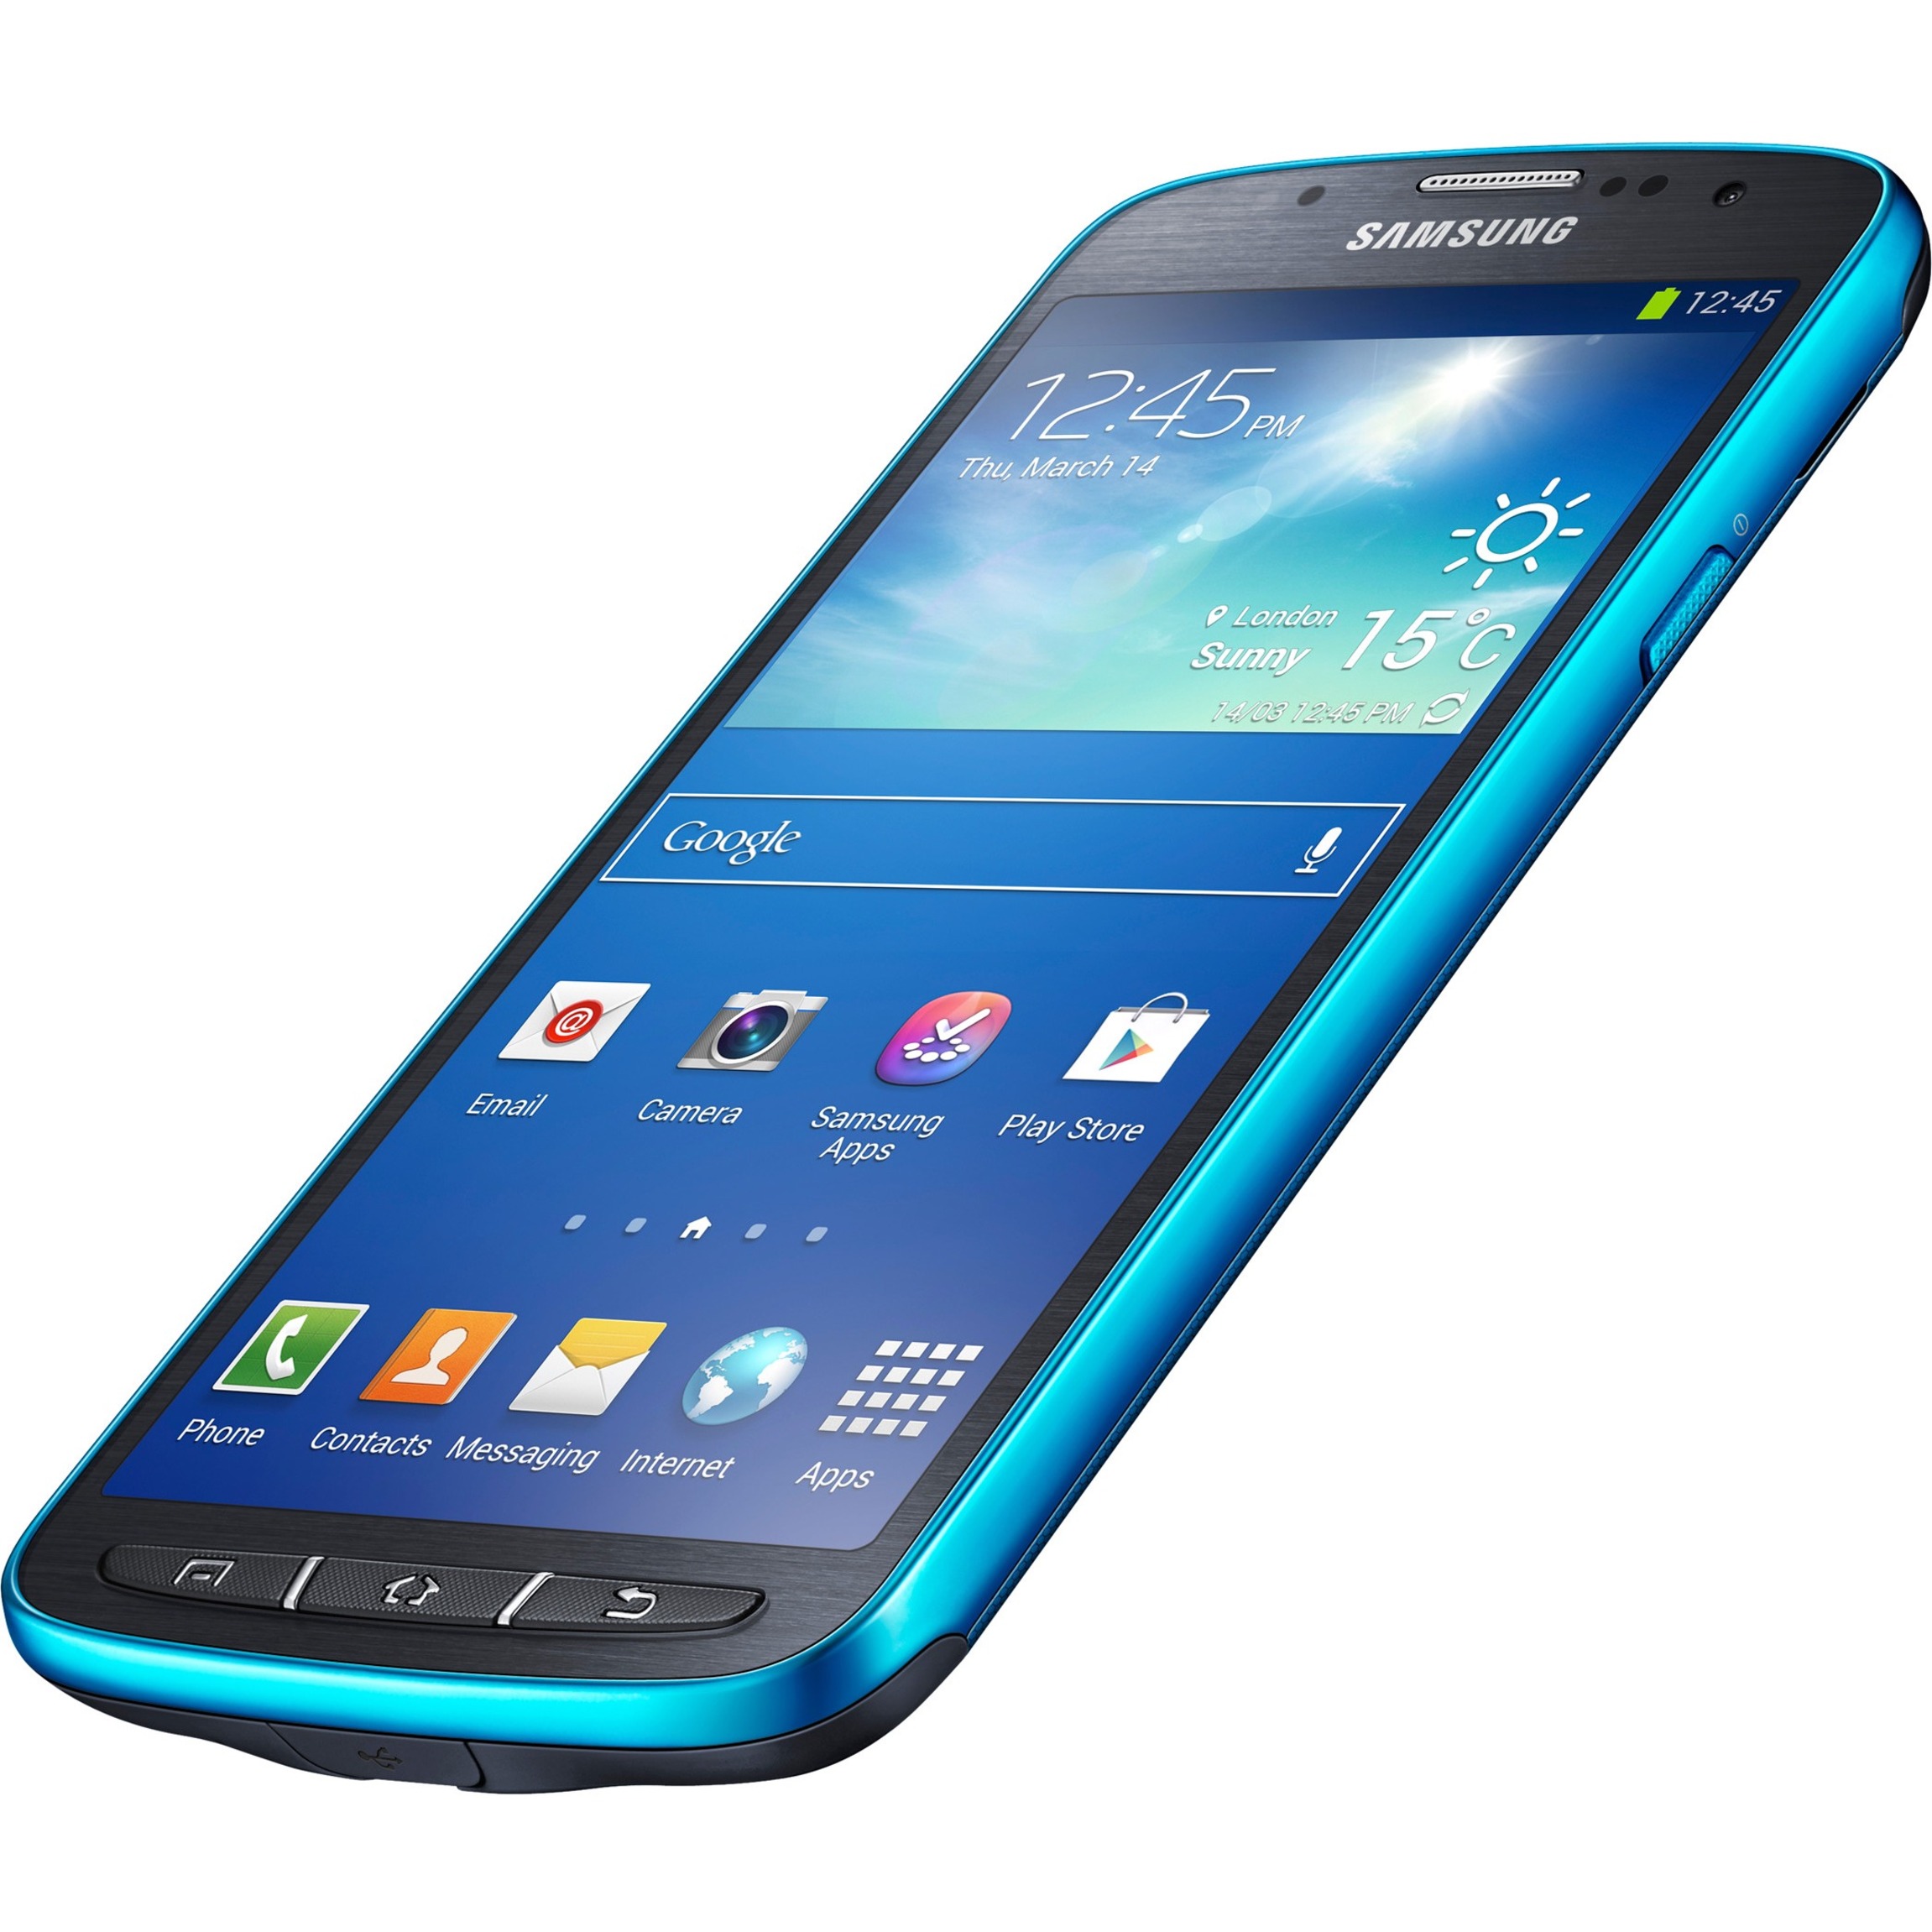 Samsung Galaxy S4 Active SGH-I537 16 GB Smartphone, 5" LCD Full HD 1920 x 1080, 2 GB RAM, Android 4.4 KitKat, 4G, Blue - image 5 of 6